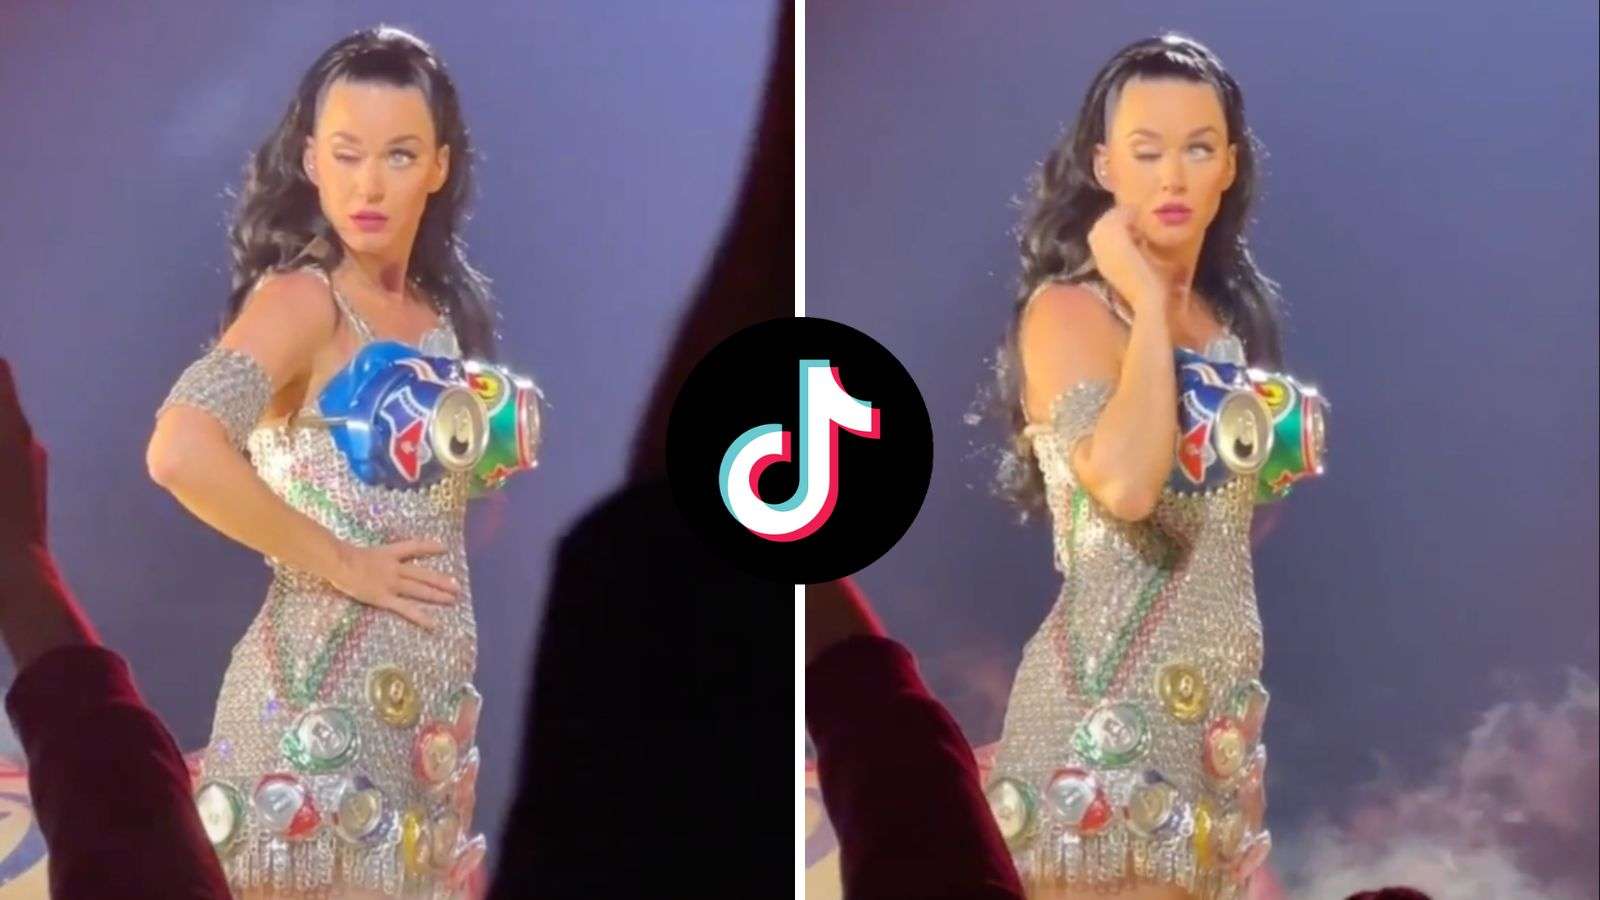 Viral TikTok of Katy Perry’s eye ‘glitch’ during concert